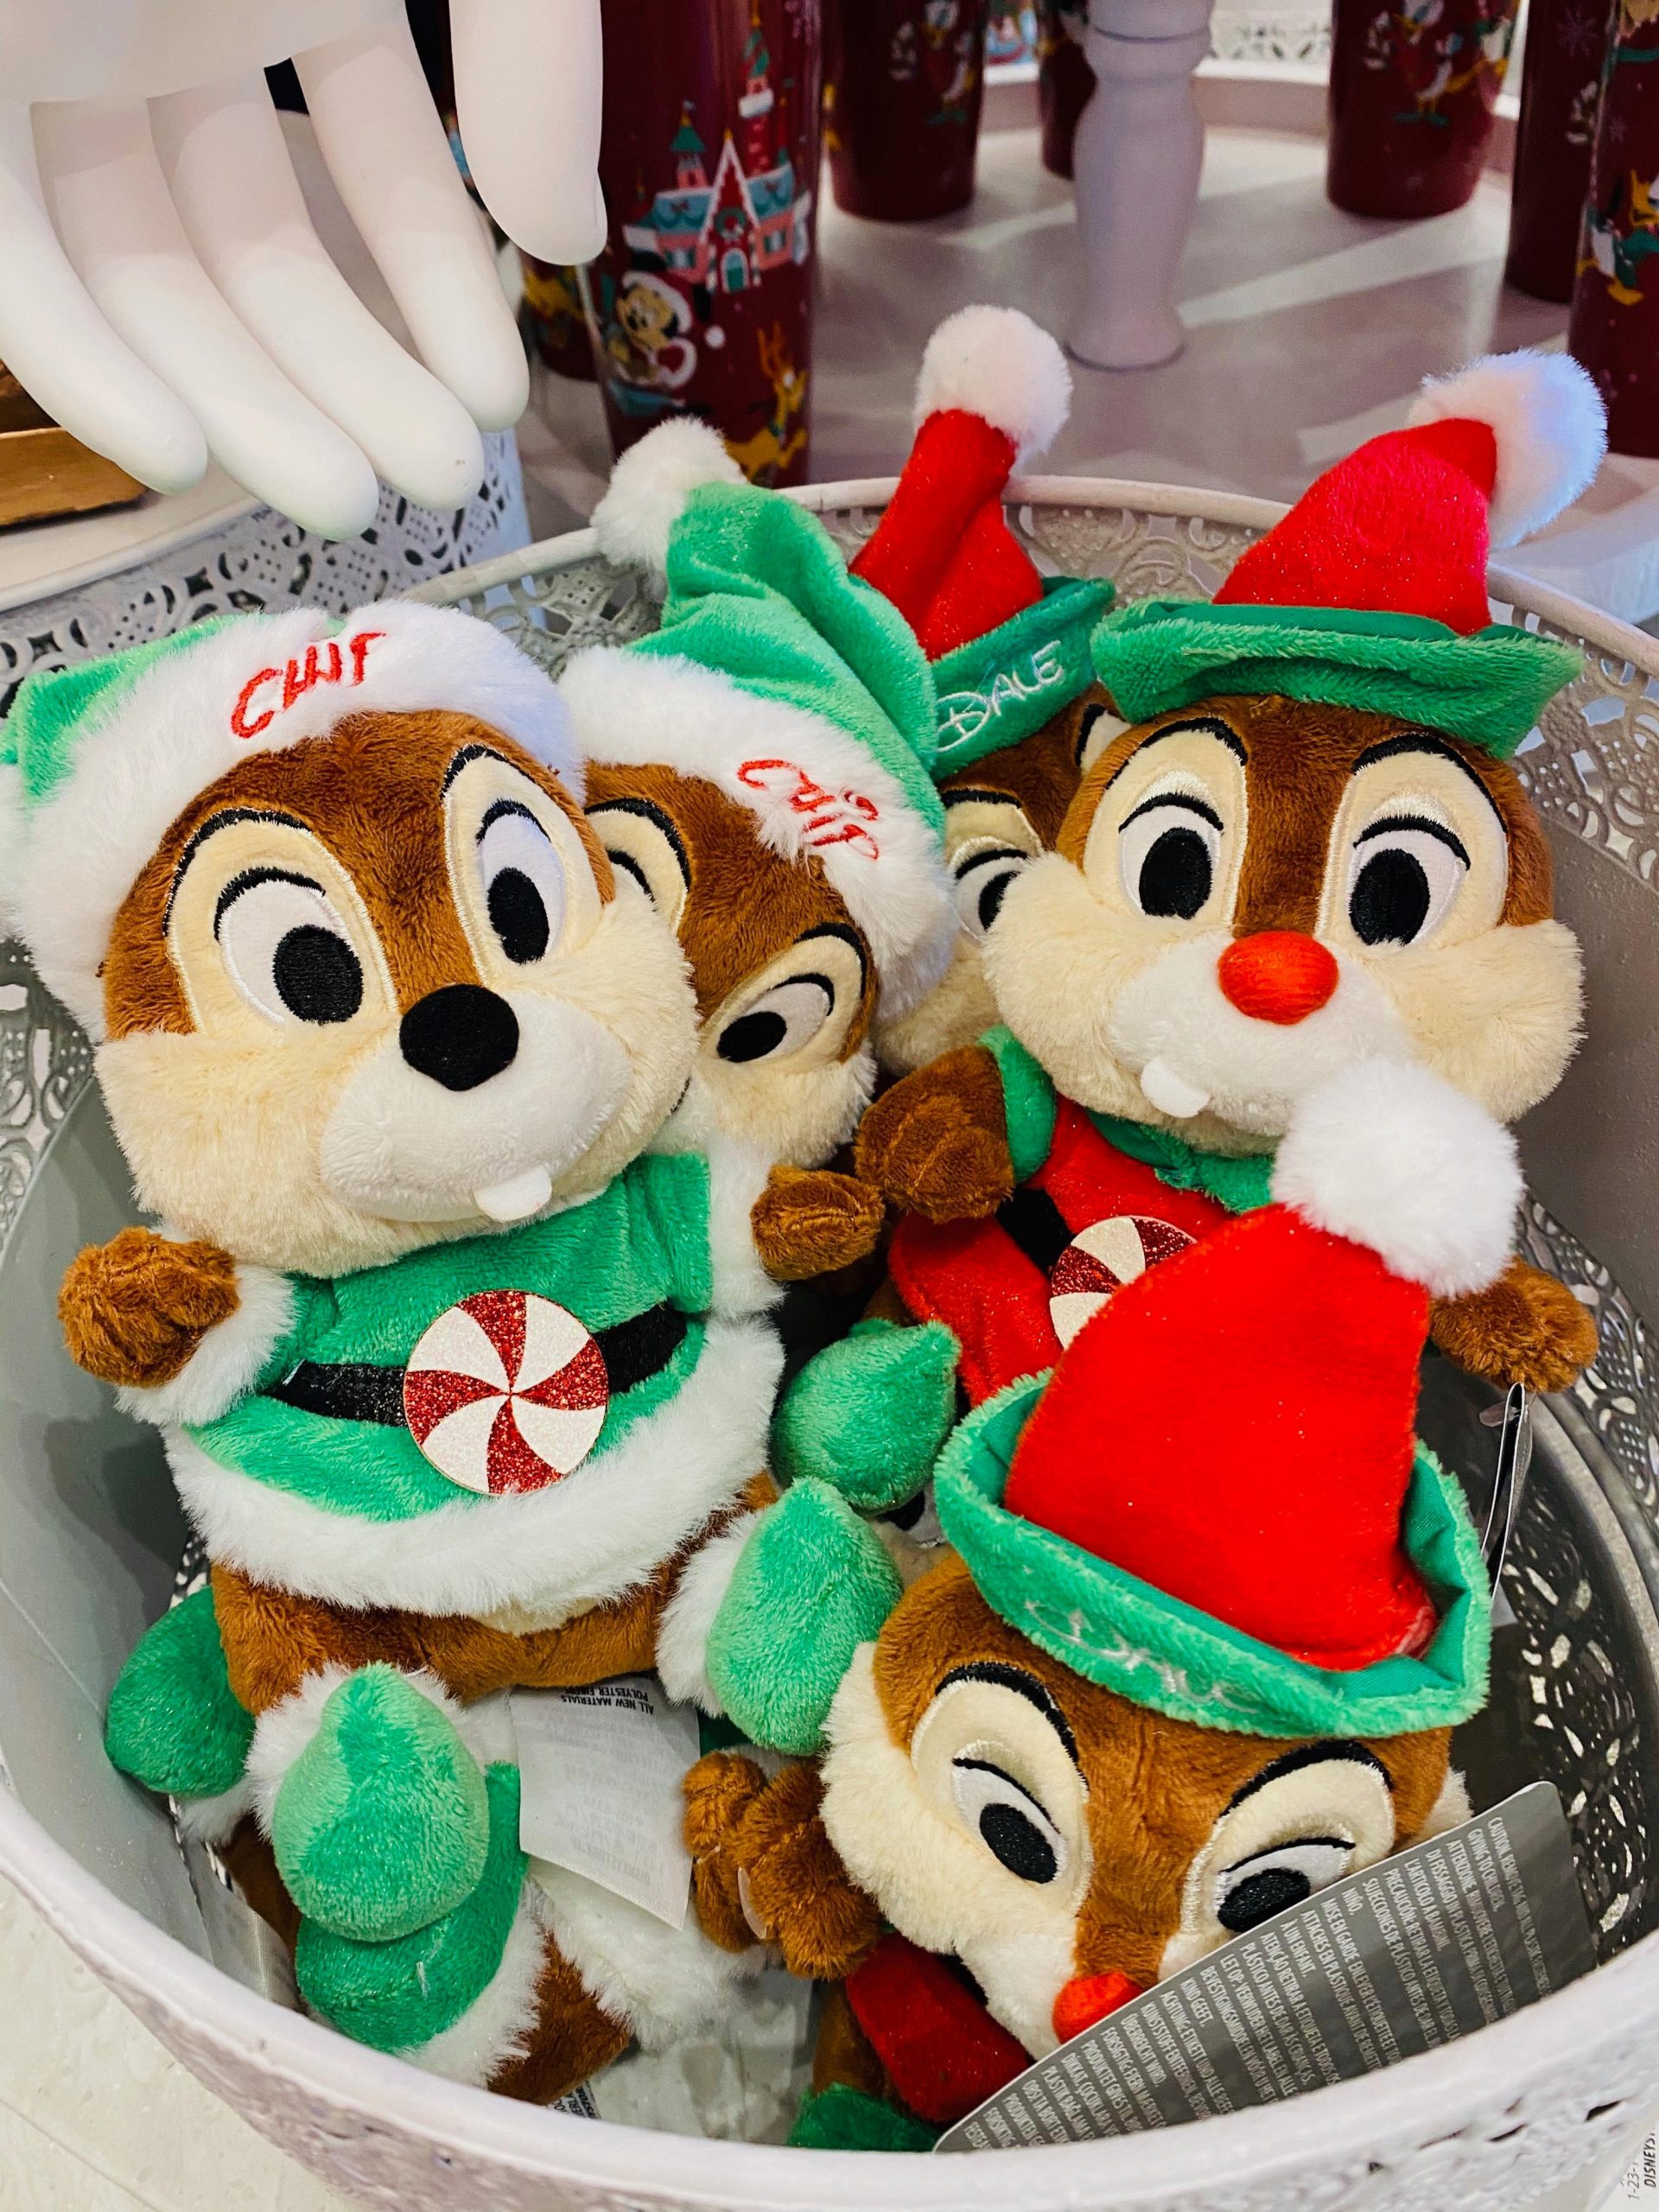 chip and dale plush